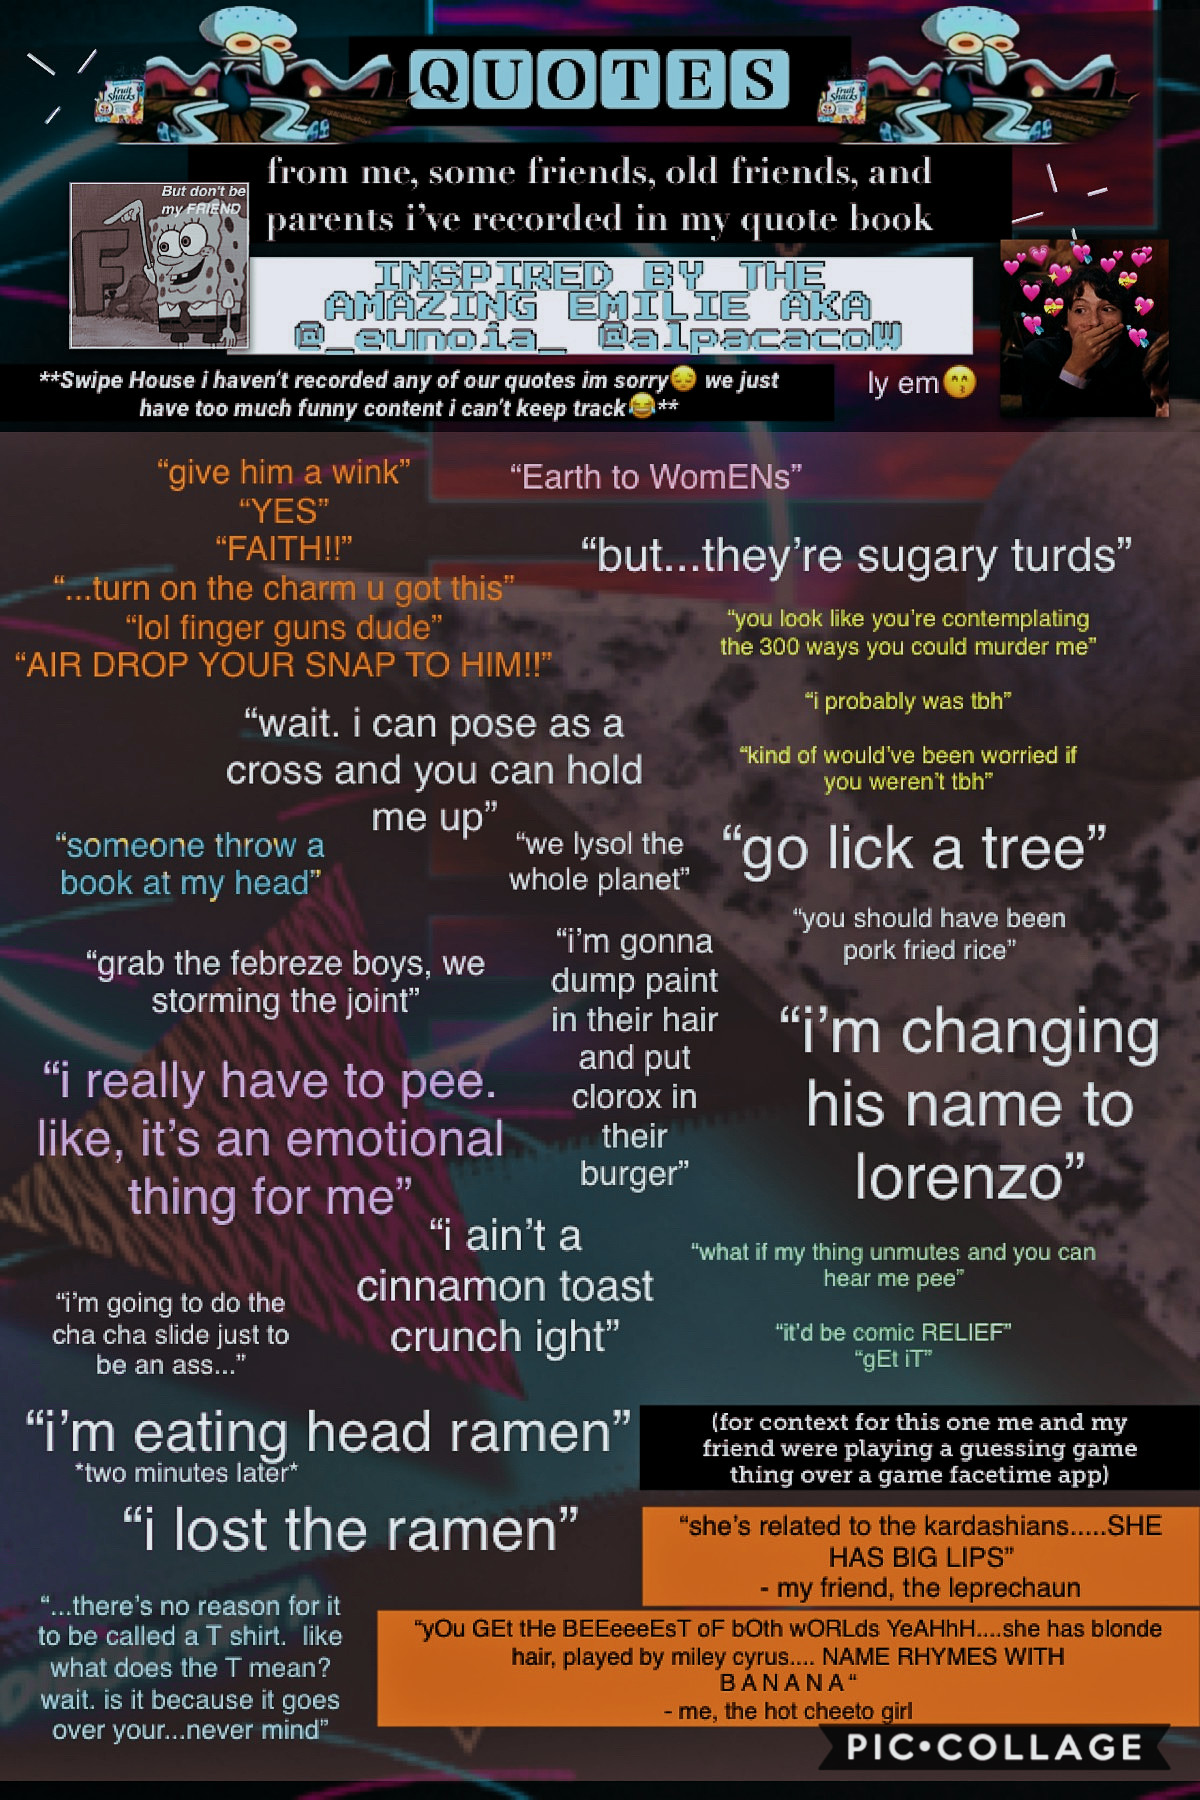 there’s still more😂 TAP
🔥CREDS TO EM FOR THIS IDEA🔥
the majority of these quotes are mine🤭 is that bad?😂 there’s a lot from my closest friend too
try and guess some that are mine skdhjs

smash like if you want more quotes🥴